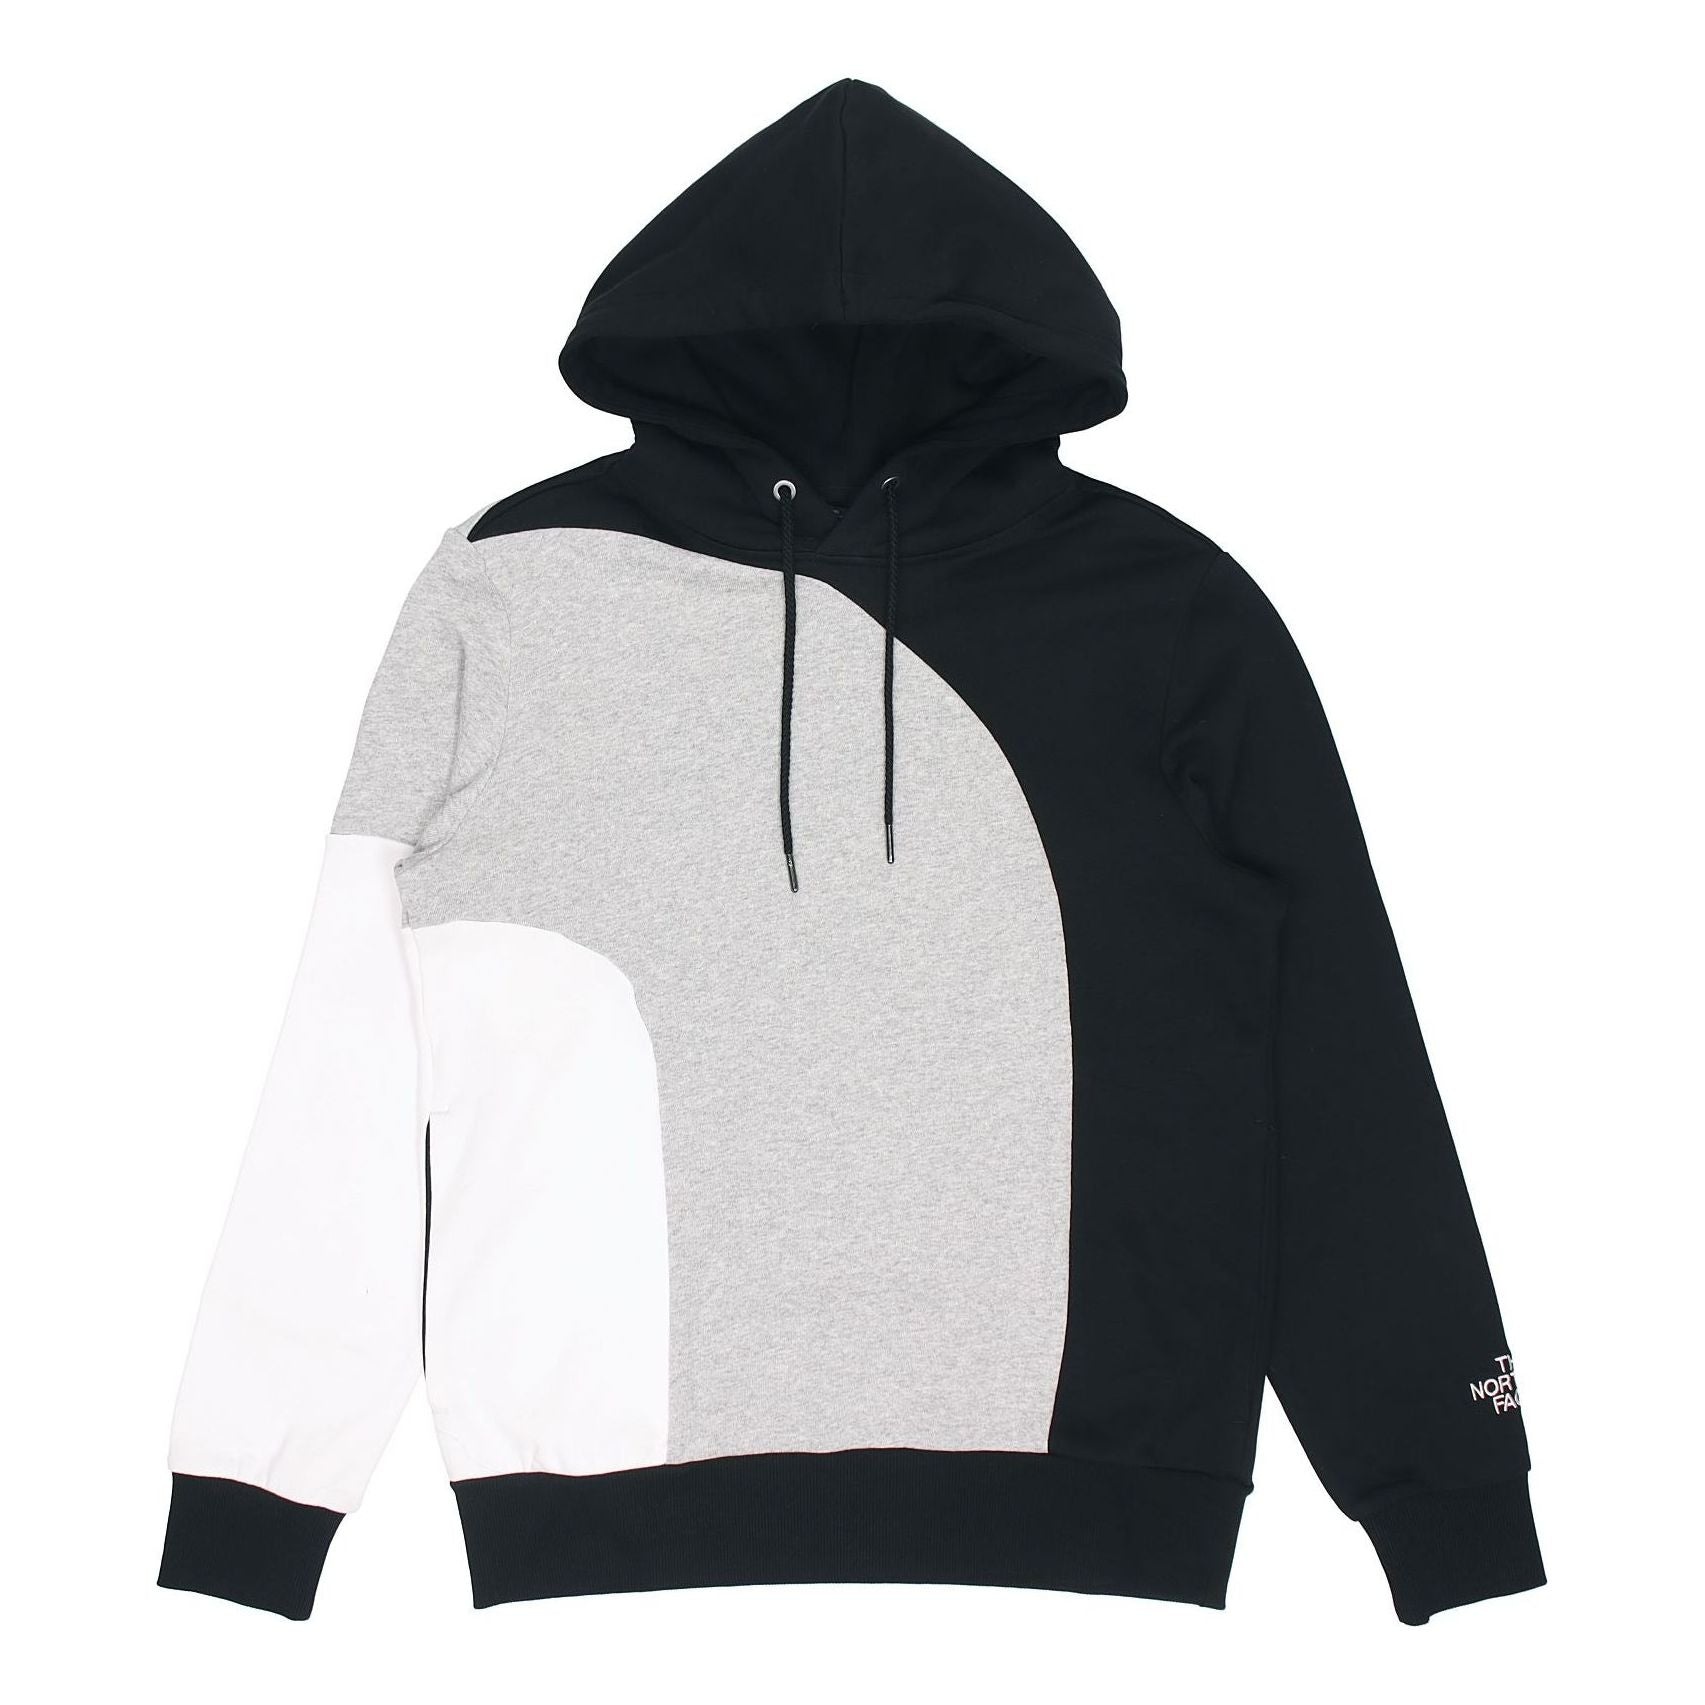 THE NORTH FACE Knit Colorblock logo Couple Style Black NF0A4NER-JK3 - 1